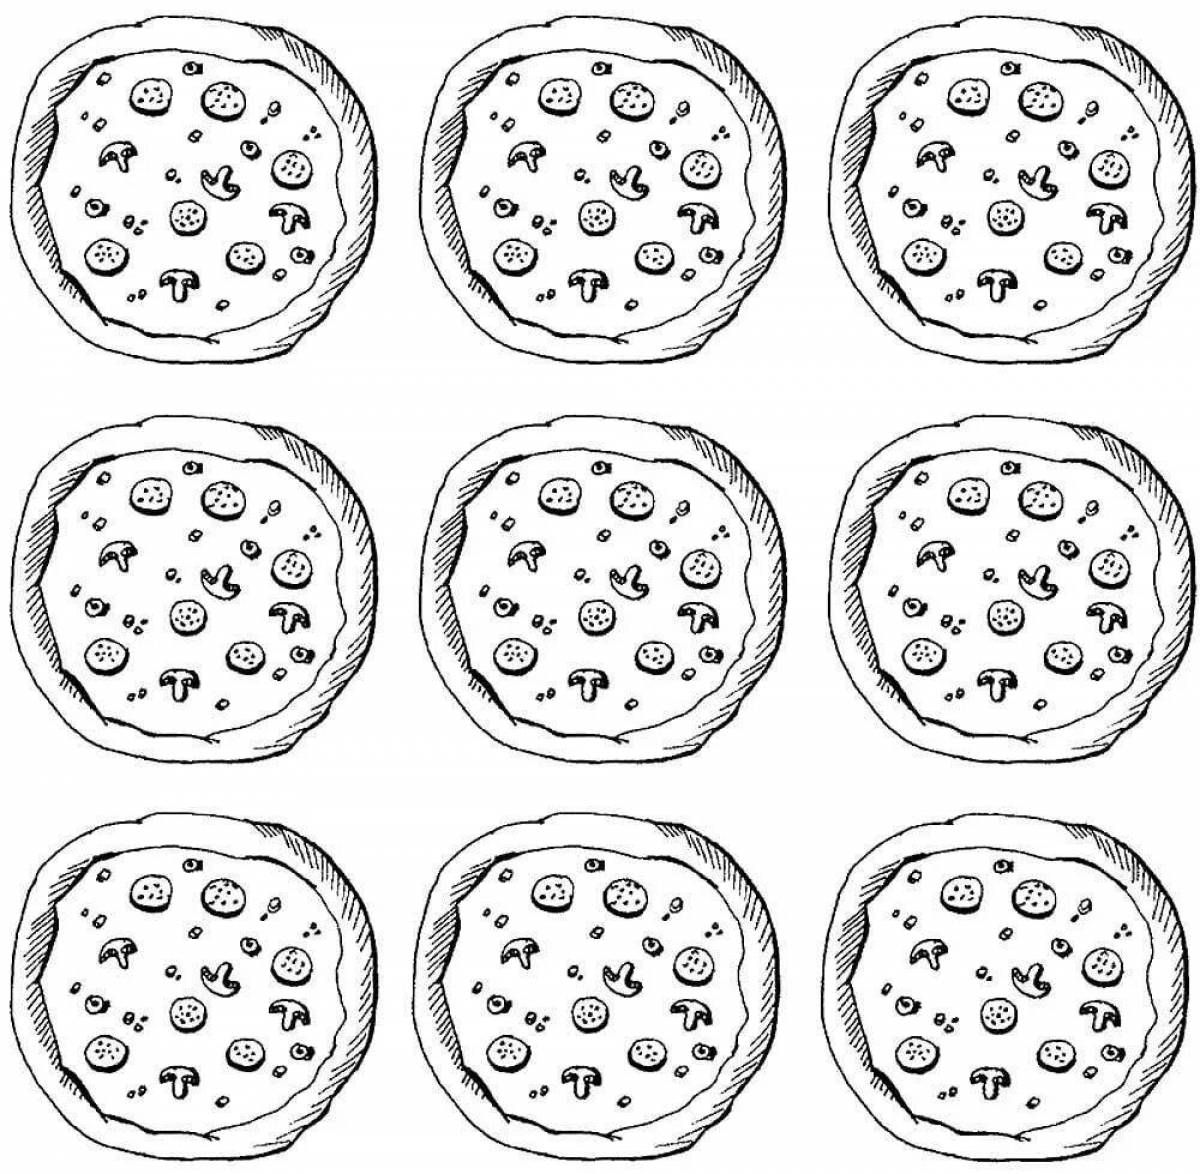 Tempting pizza toppings coloring book